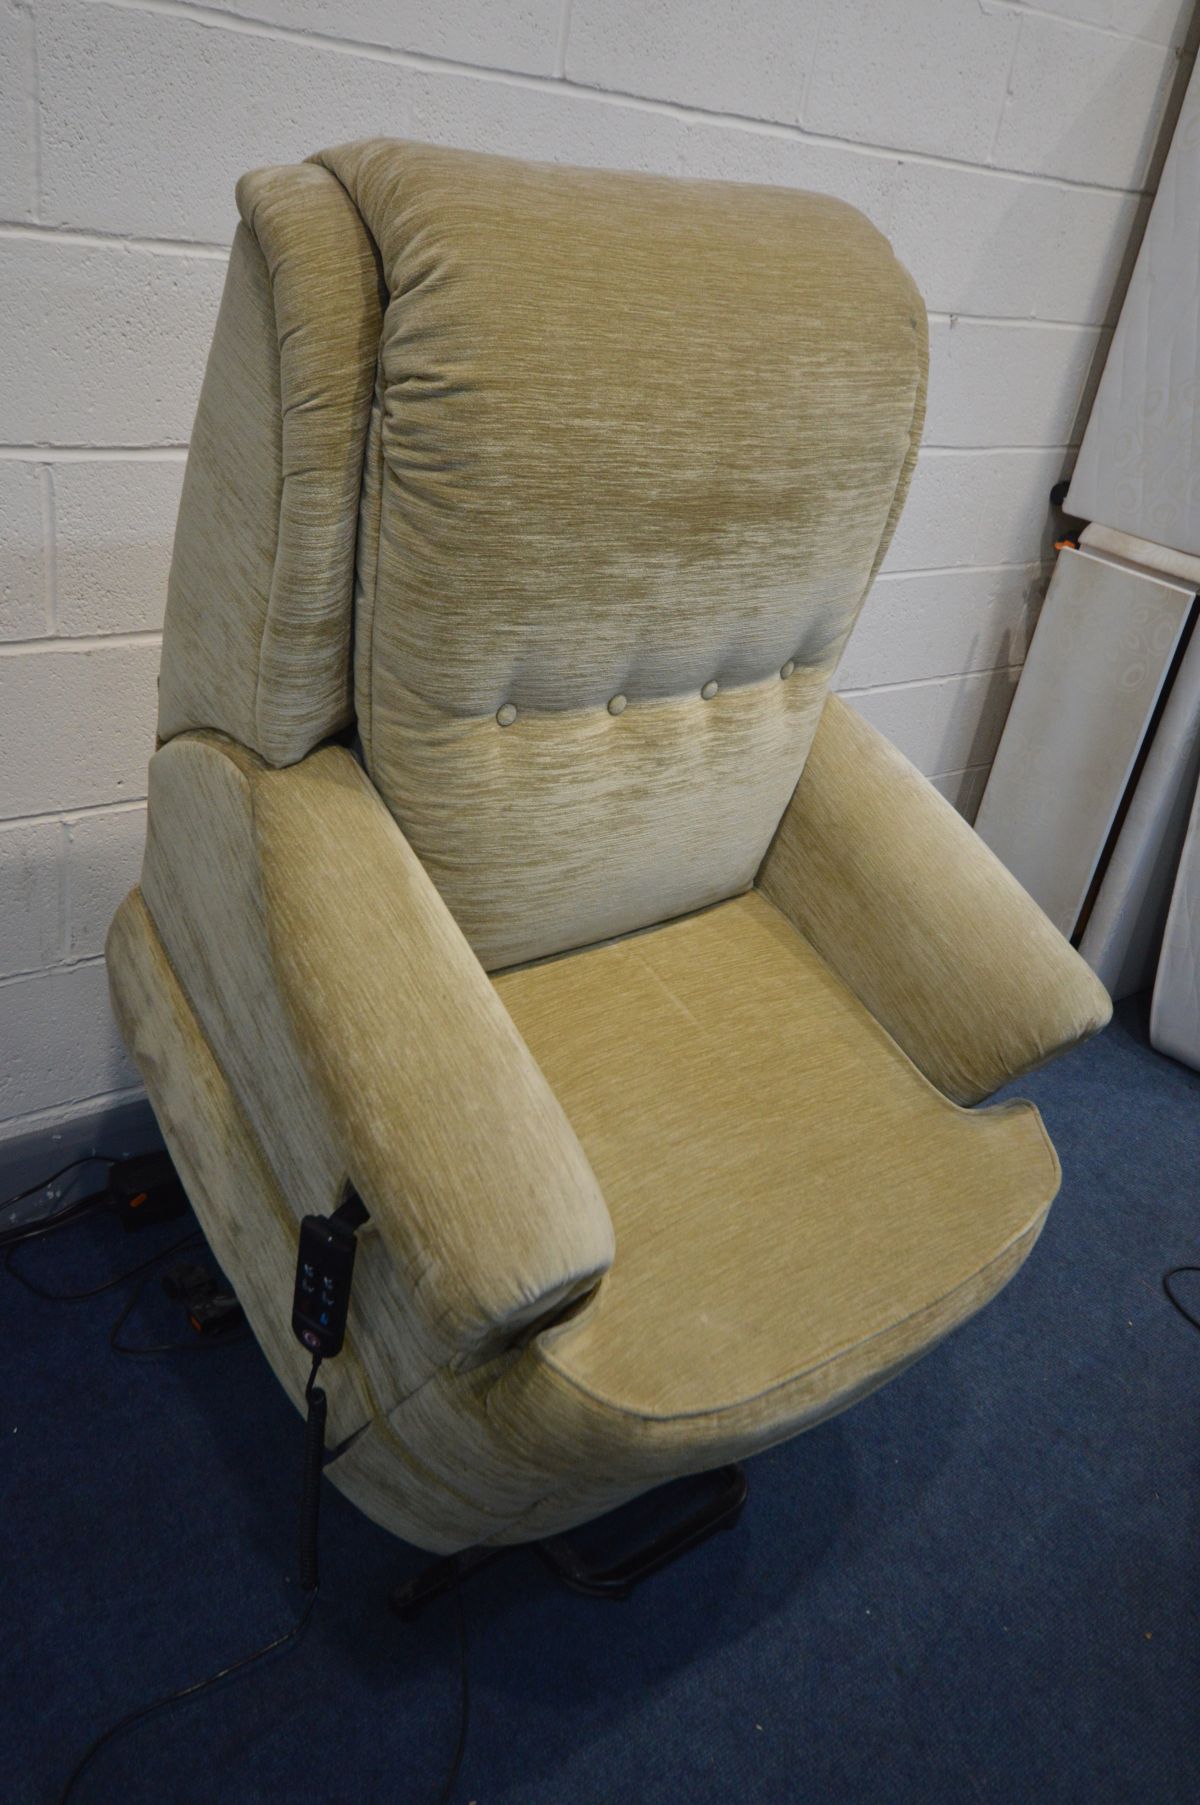 A G PLAN BEIGE UPHOLSTERED ELECTRIC RISE AND RECLINE ARMCHAIR (PAT pass and working) - Image 4 of 5